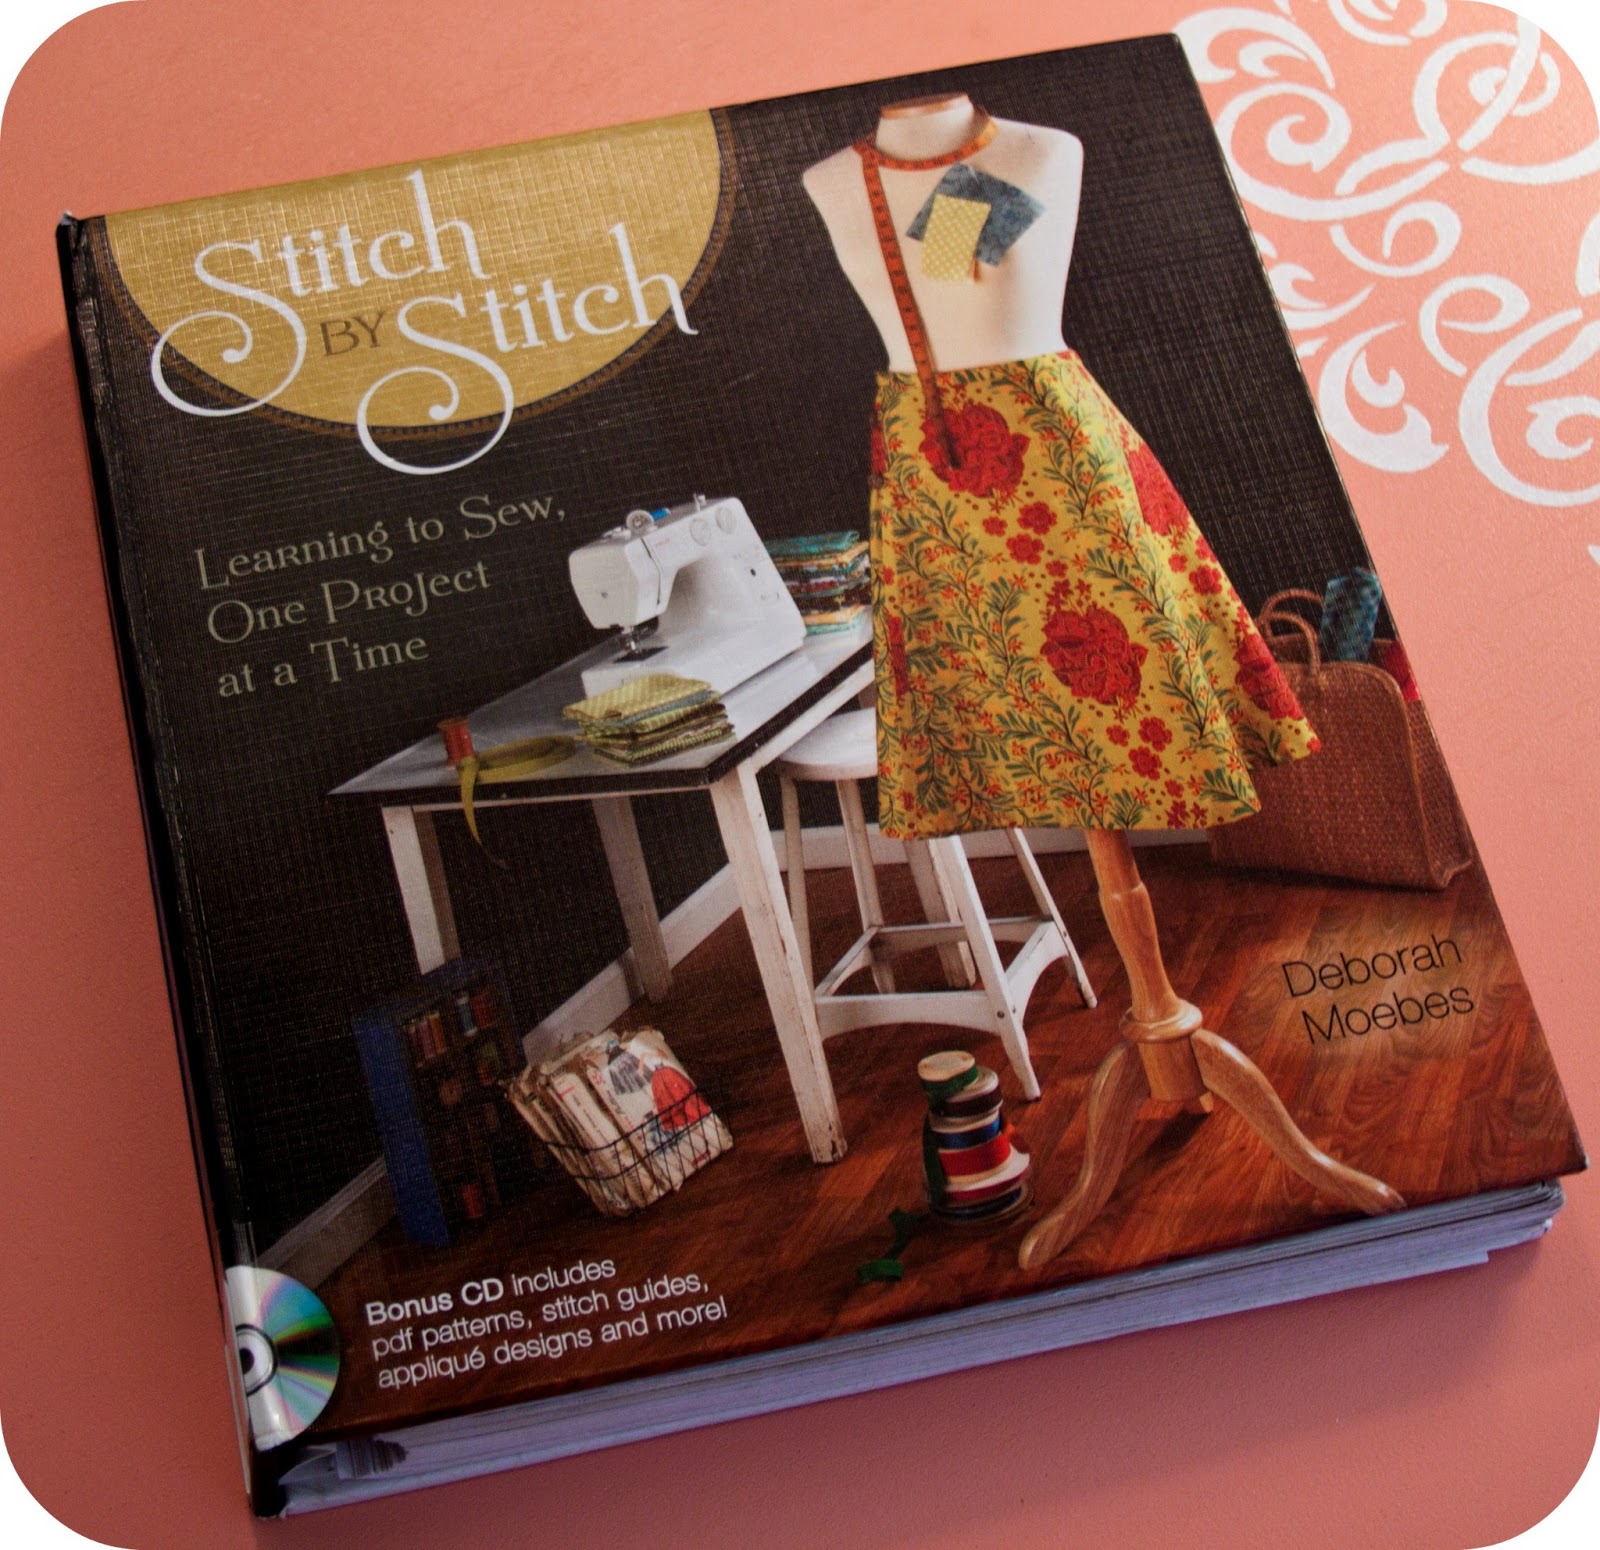 Stitch by Stitch, Learning to Sew (book cover)